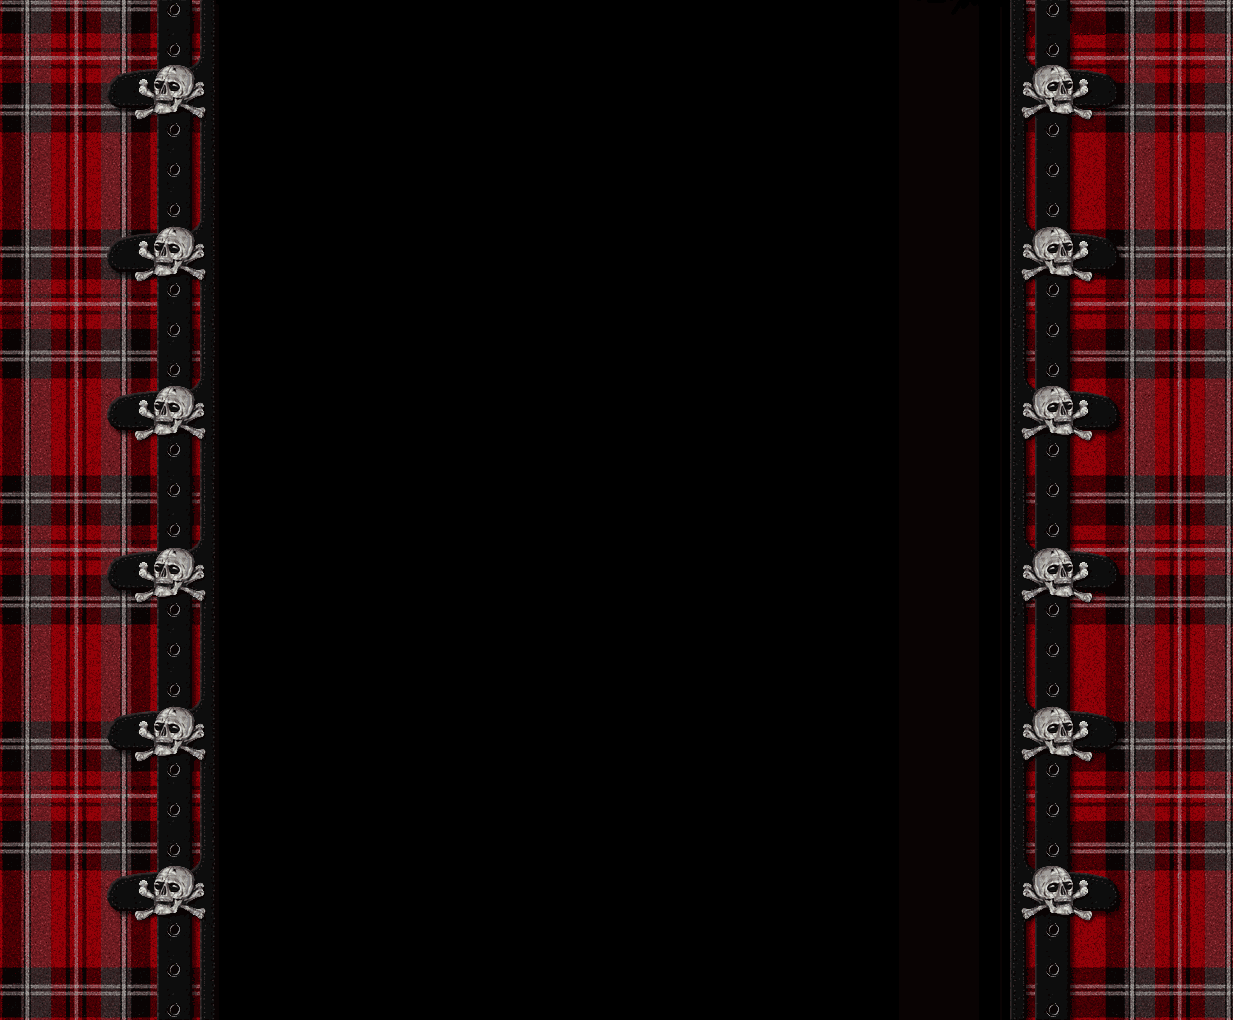 Skull red black checks wallpaper background picture and layout ...